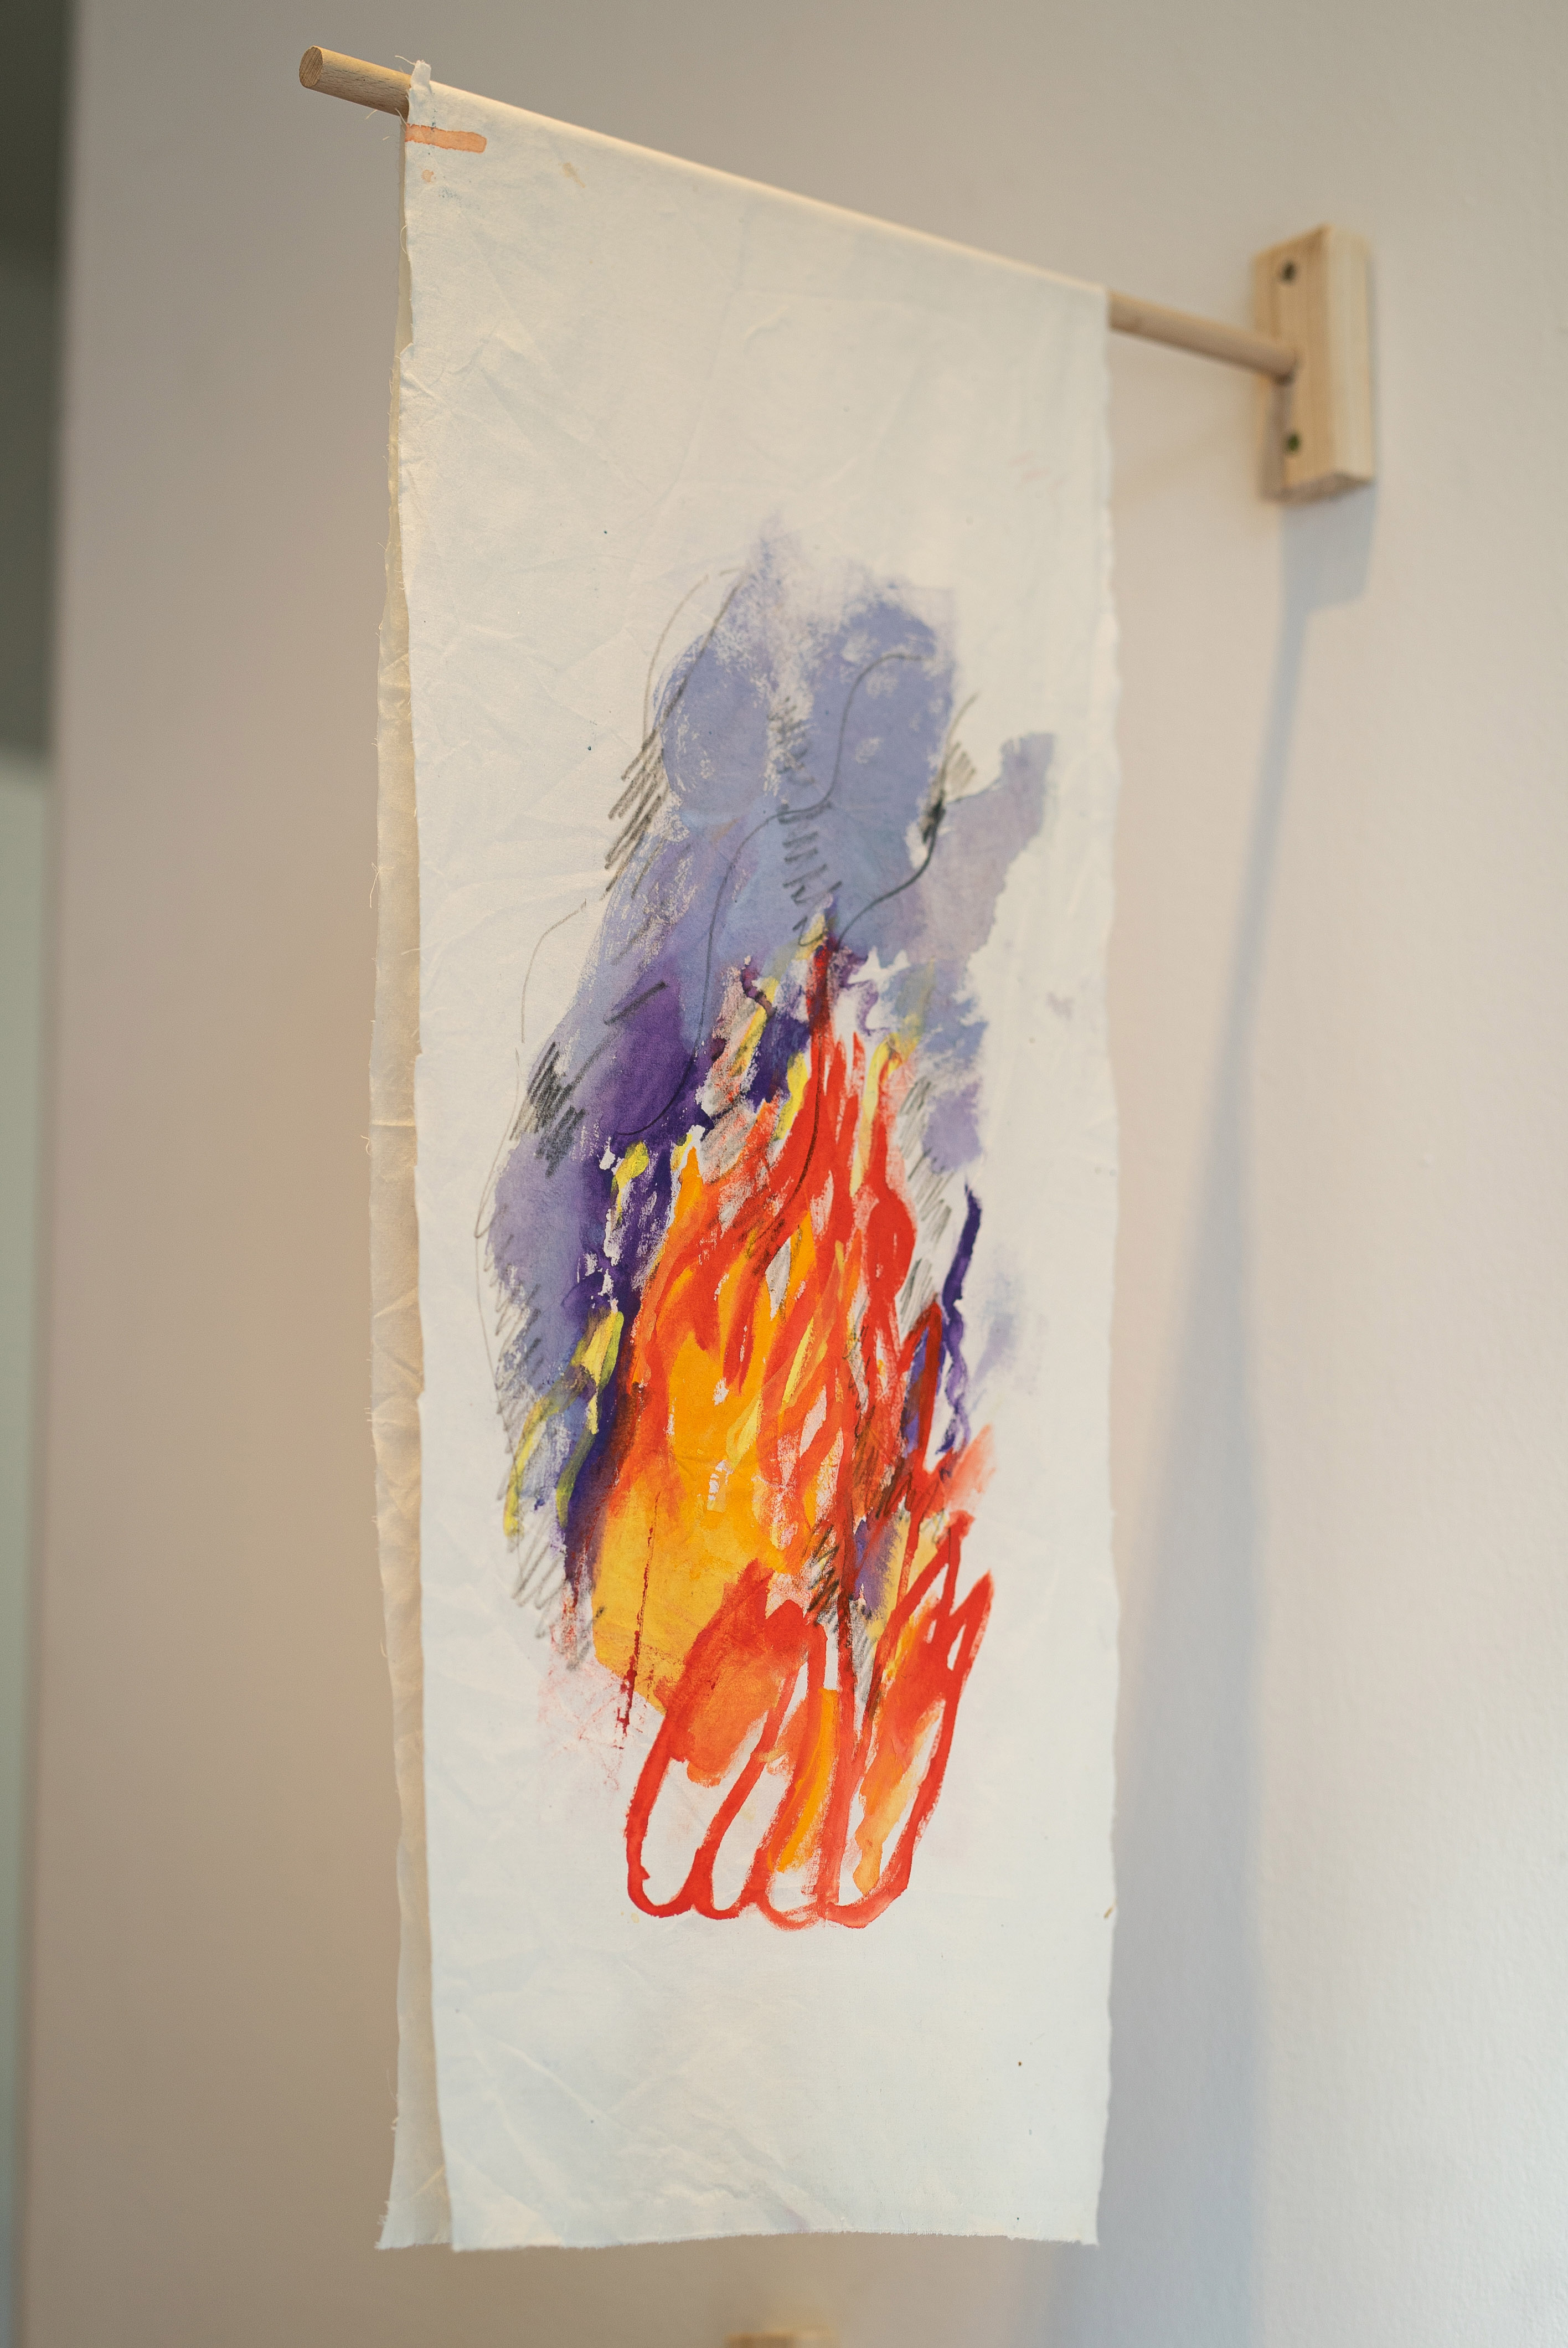 The photo shows a piece of rectangular antique white fabric hanging from a wooden pole on the wall. It resembles a coat of arms. A fire is painted on the fabric with bright red, orange and purple colors. The coat of arms is part of the stage installation by Irene Fernandez Arcas for the exhibition "Burlungis" at Galerie im Turm in Berlin.